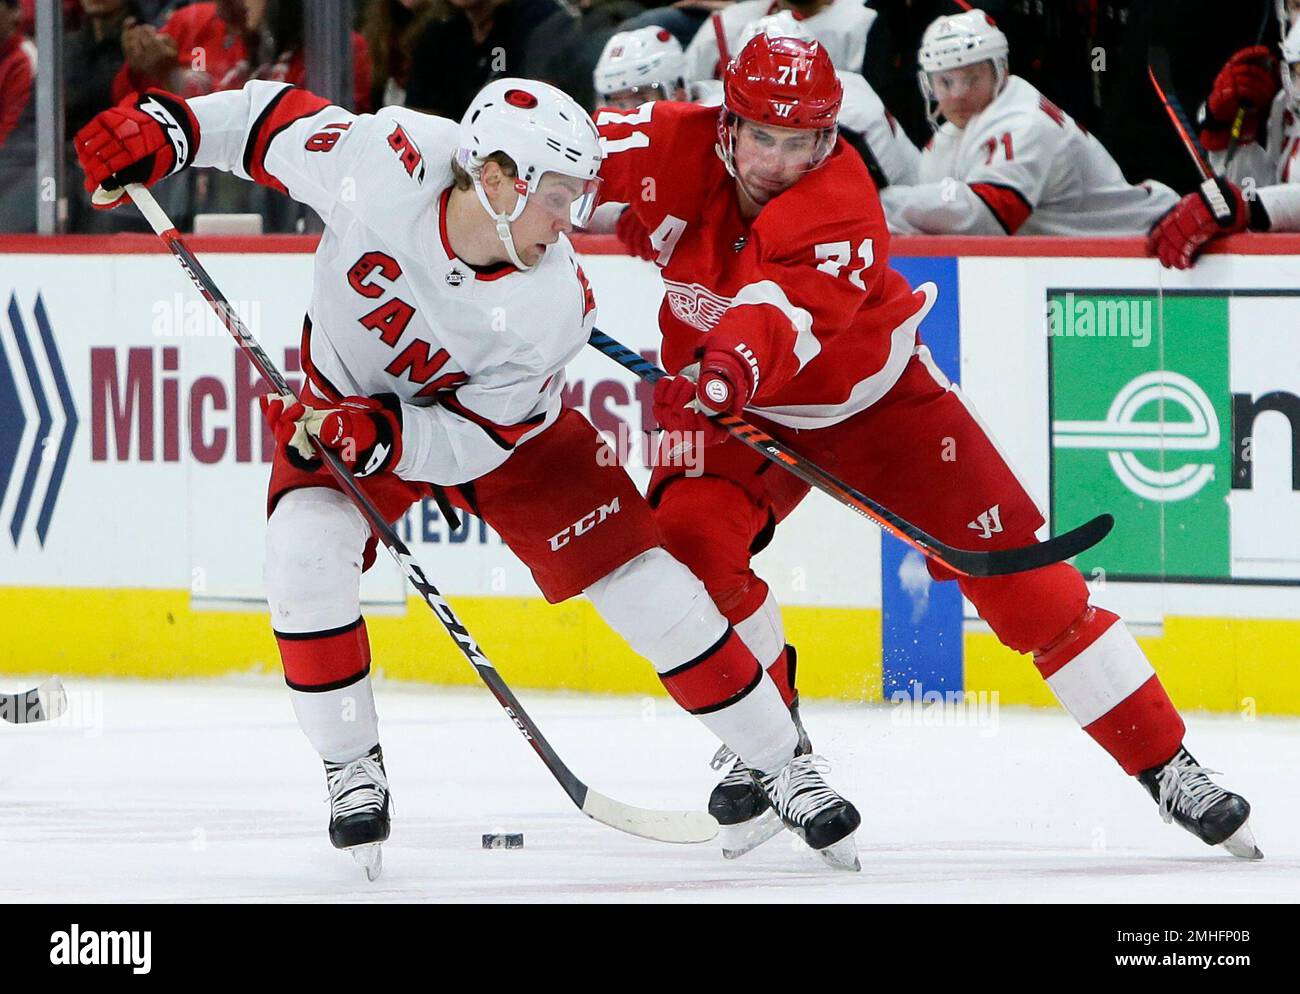 Raleigh, North Carolina, USA. 10th Oct, 2015. Detroit Red Wings center Dylan  Larkin (71) during the NHL game between the Detroit Red Wings and the  Carolina Hurricanes at the PNC Arena. The